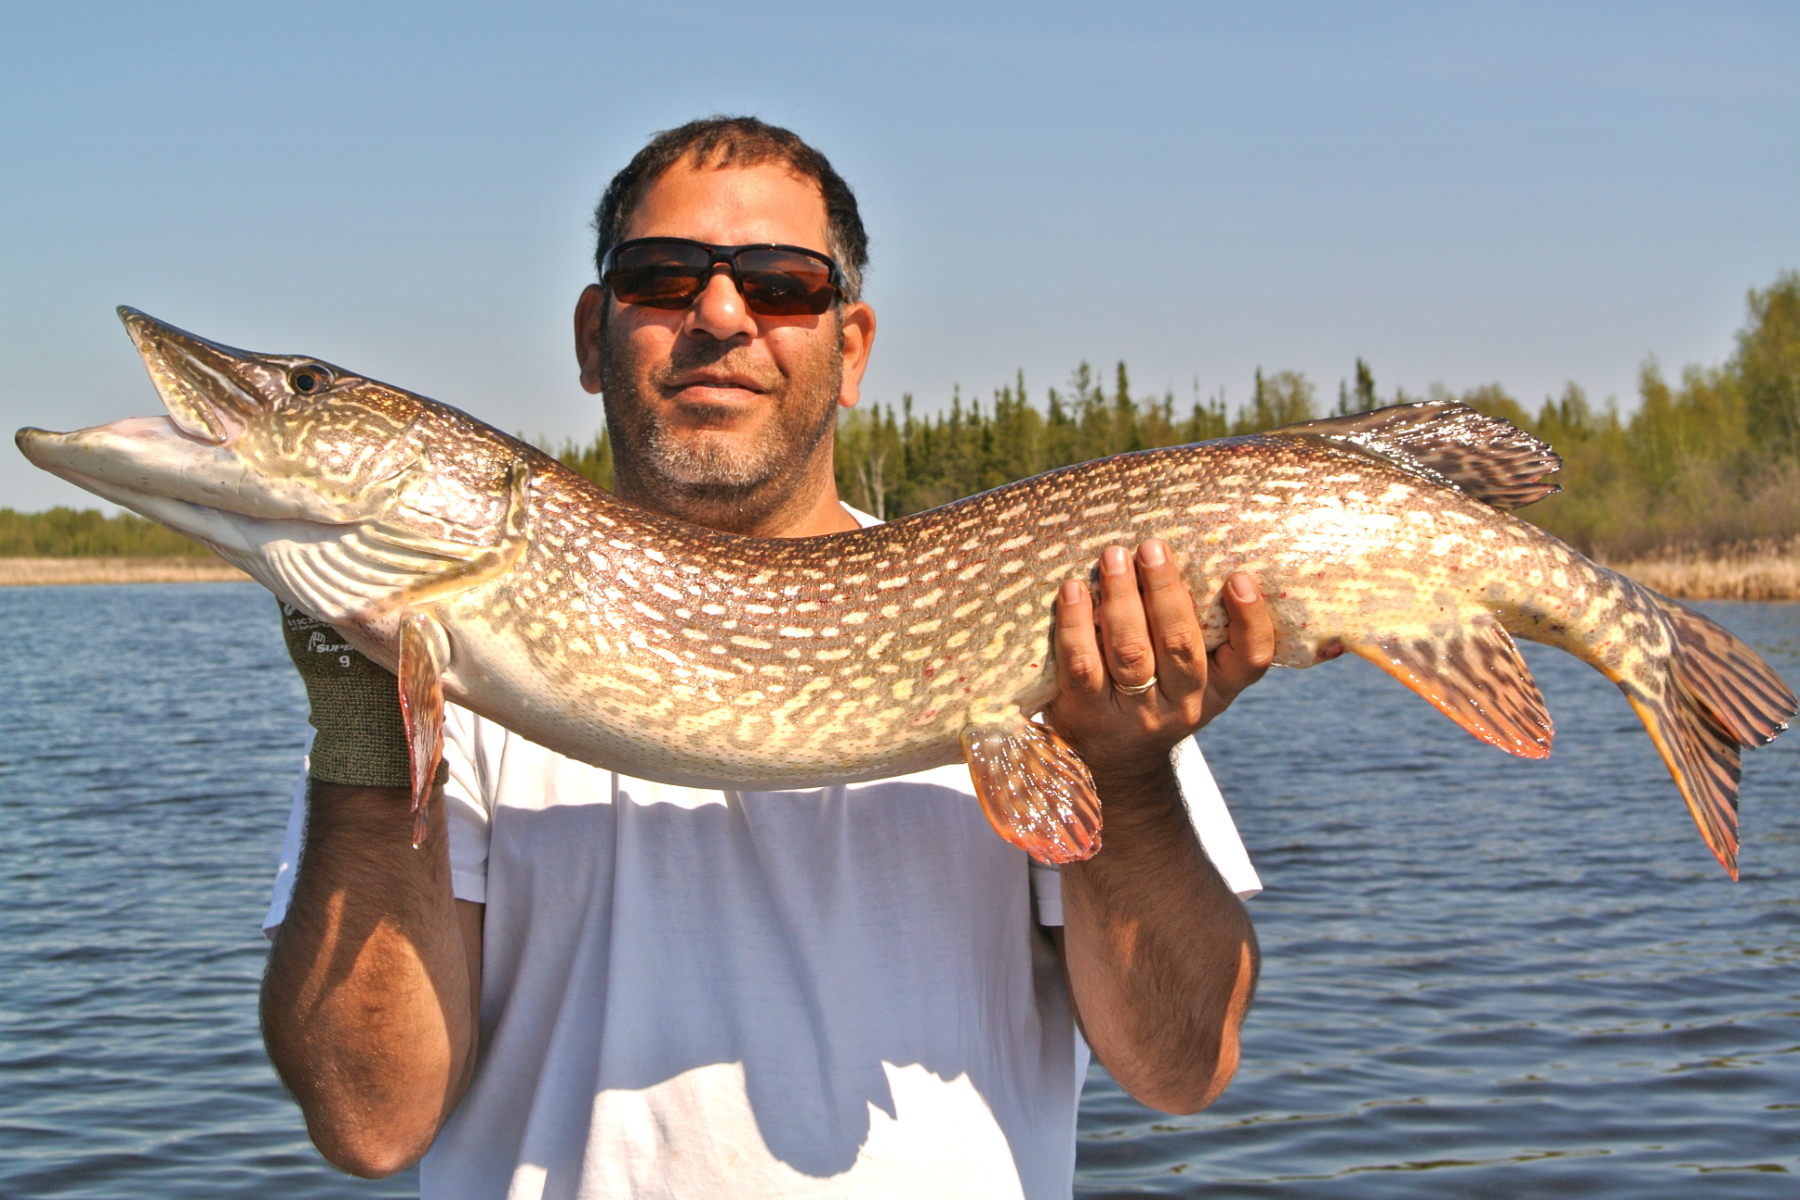 Man with prize monster pike fish